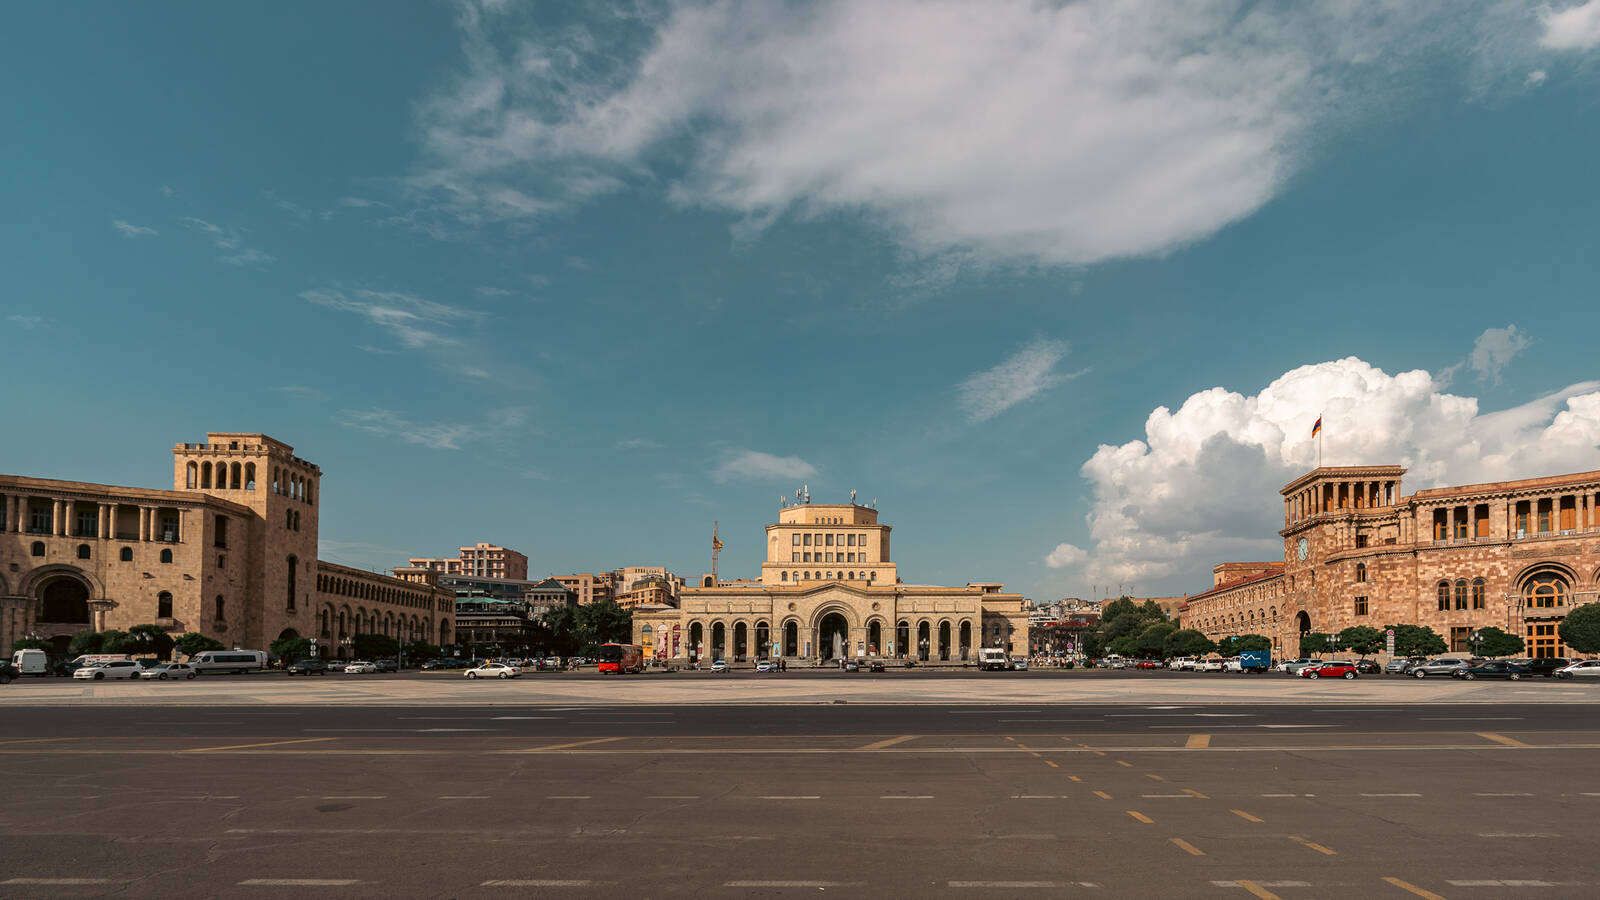 Image of Republic Square by James Billings.